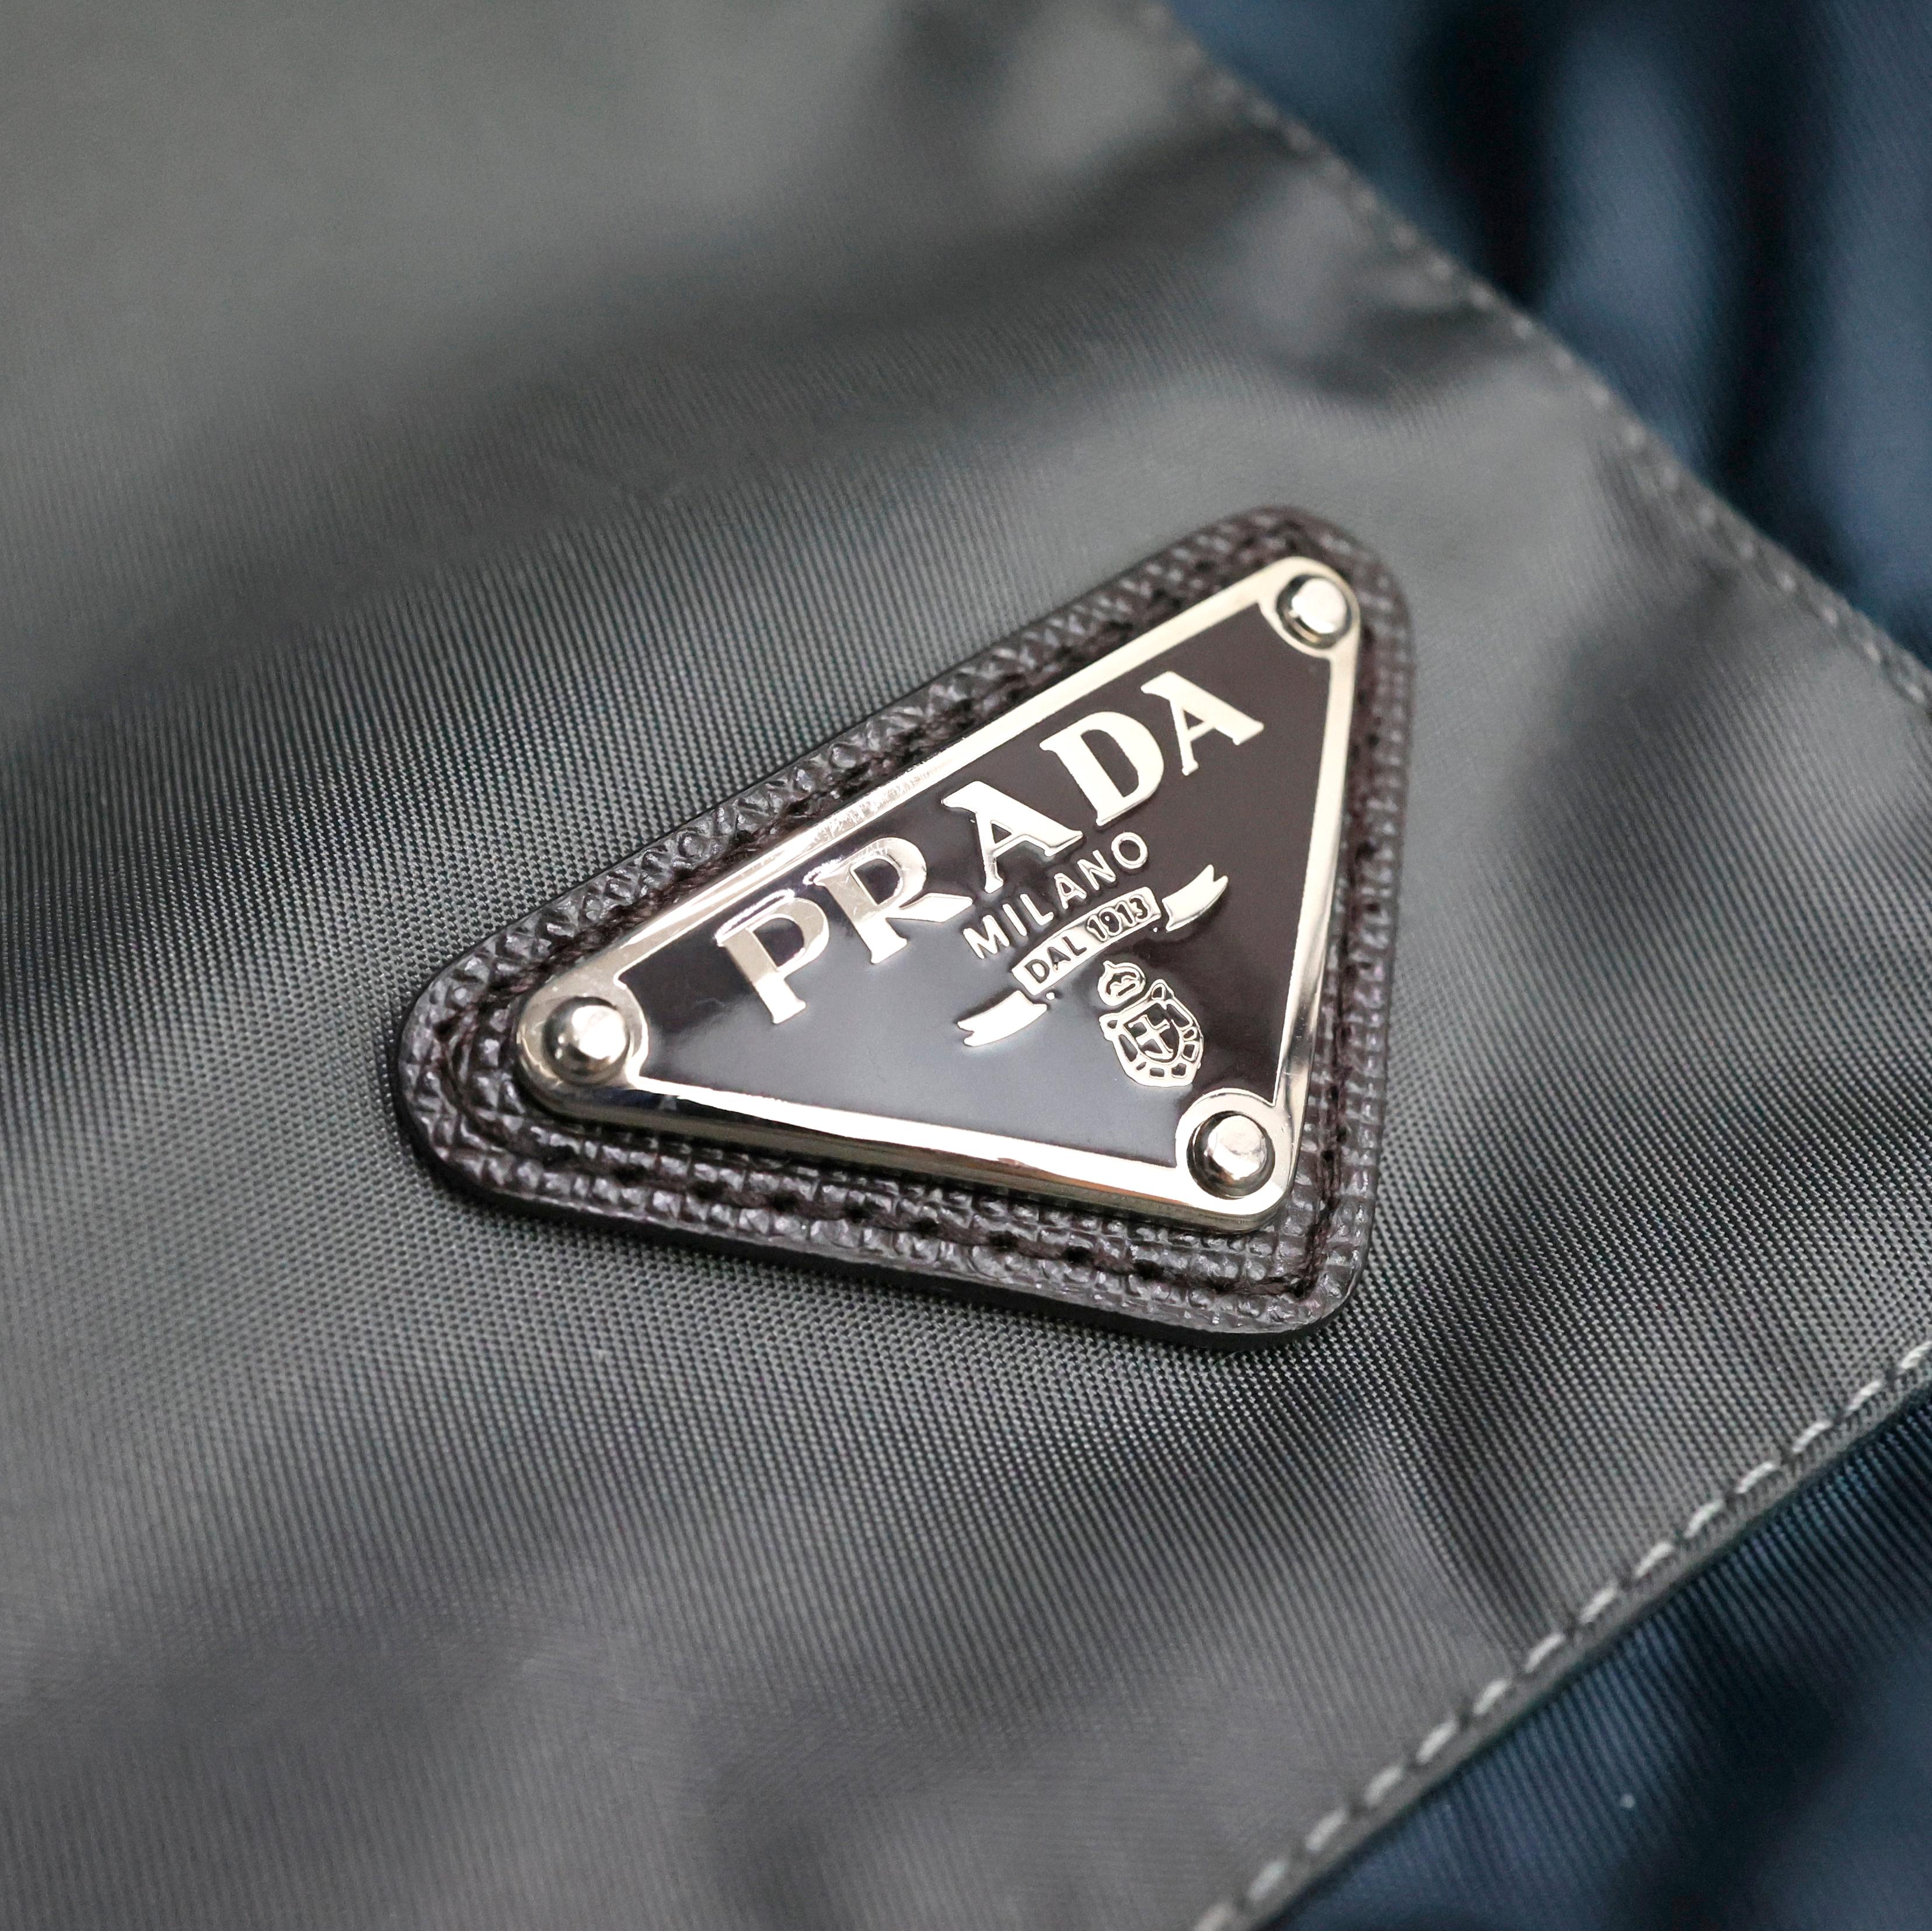 Prada Triangle Logo Jacket in Nylon and Leather In Excellent Condition For Sale In Bressanone, IT